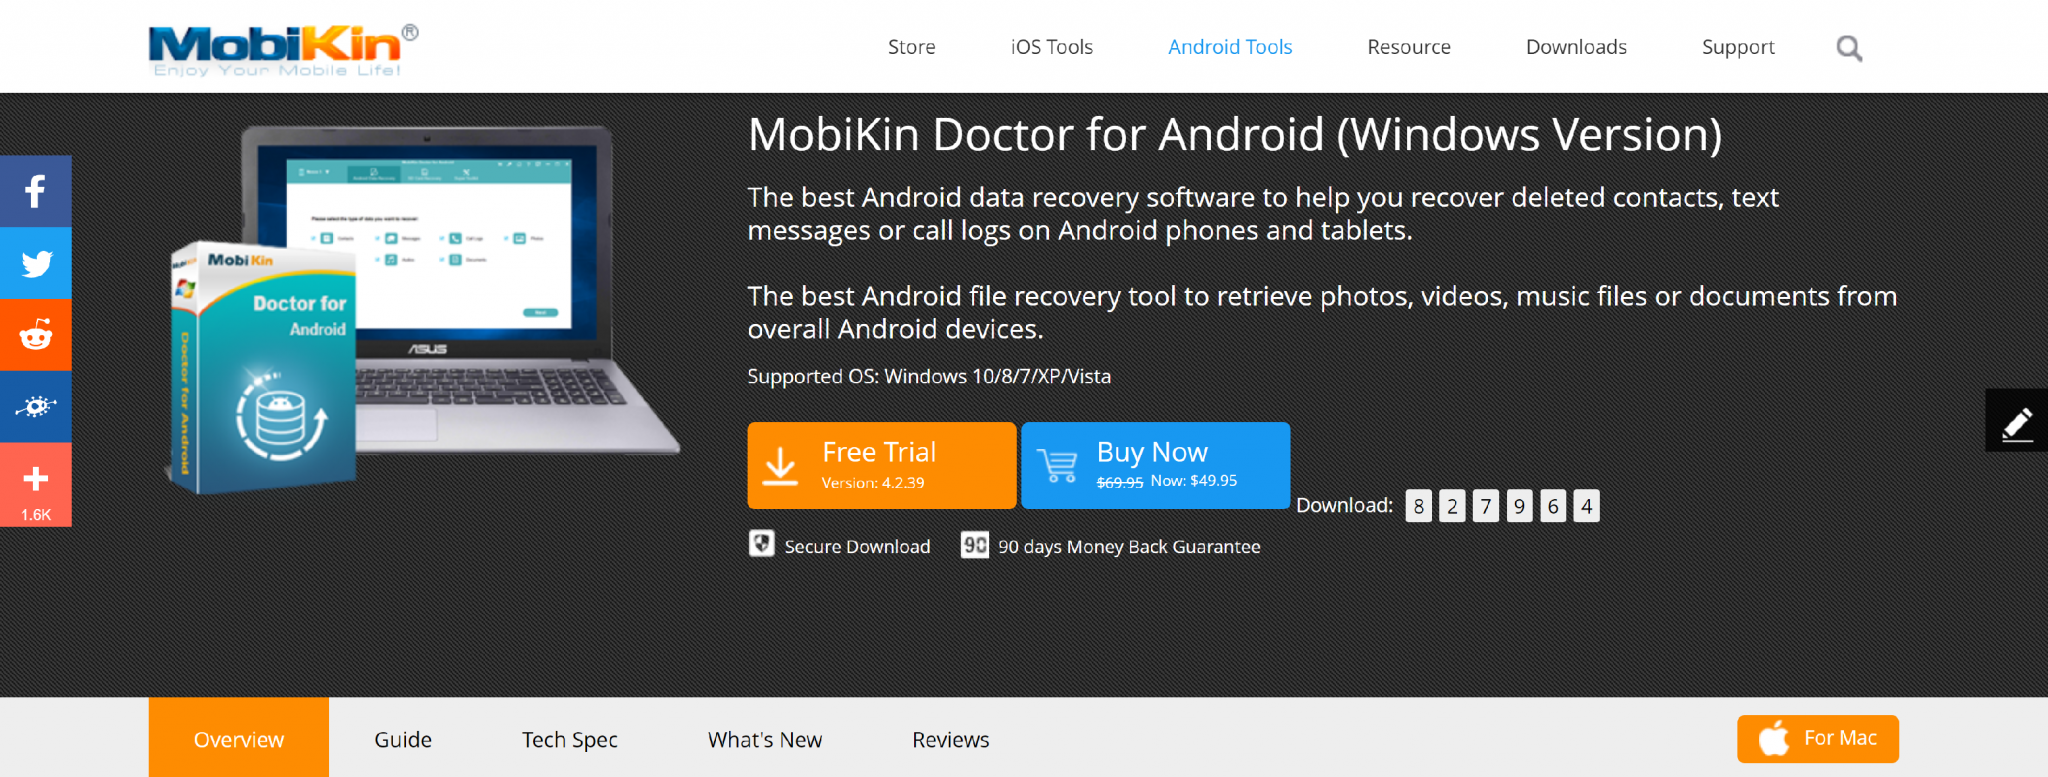 mobikin doctor for android registration code 1.1